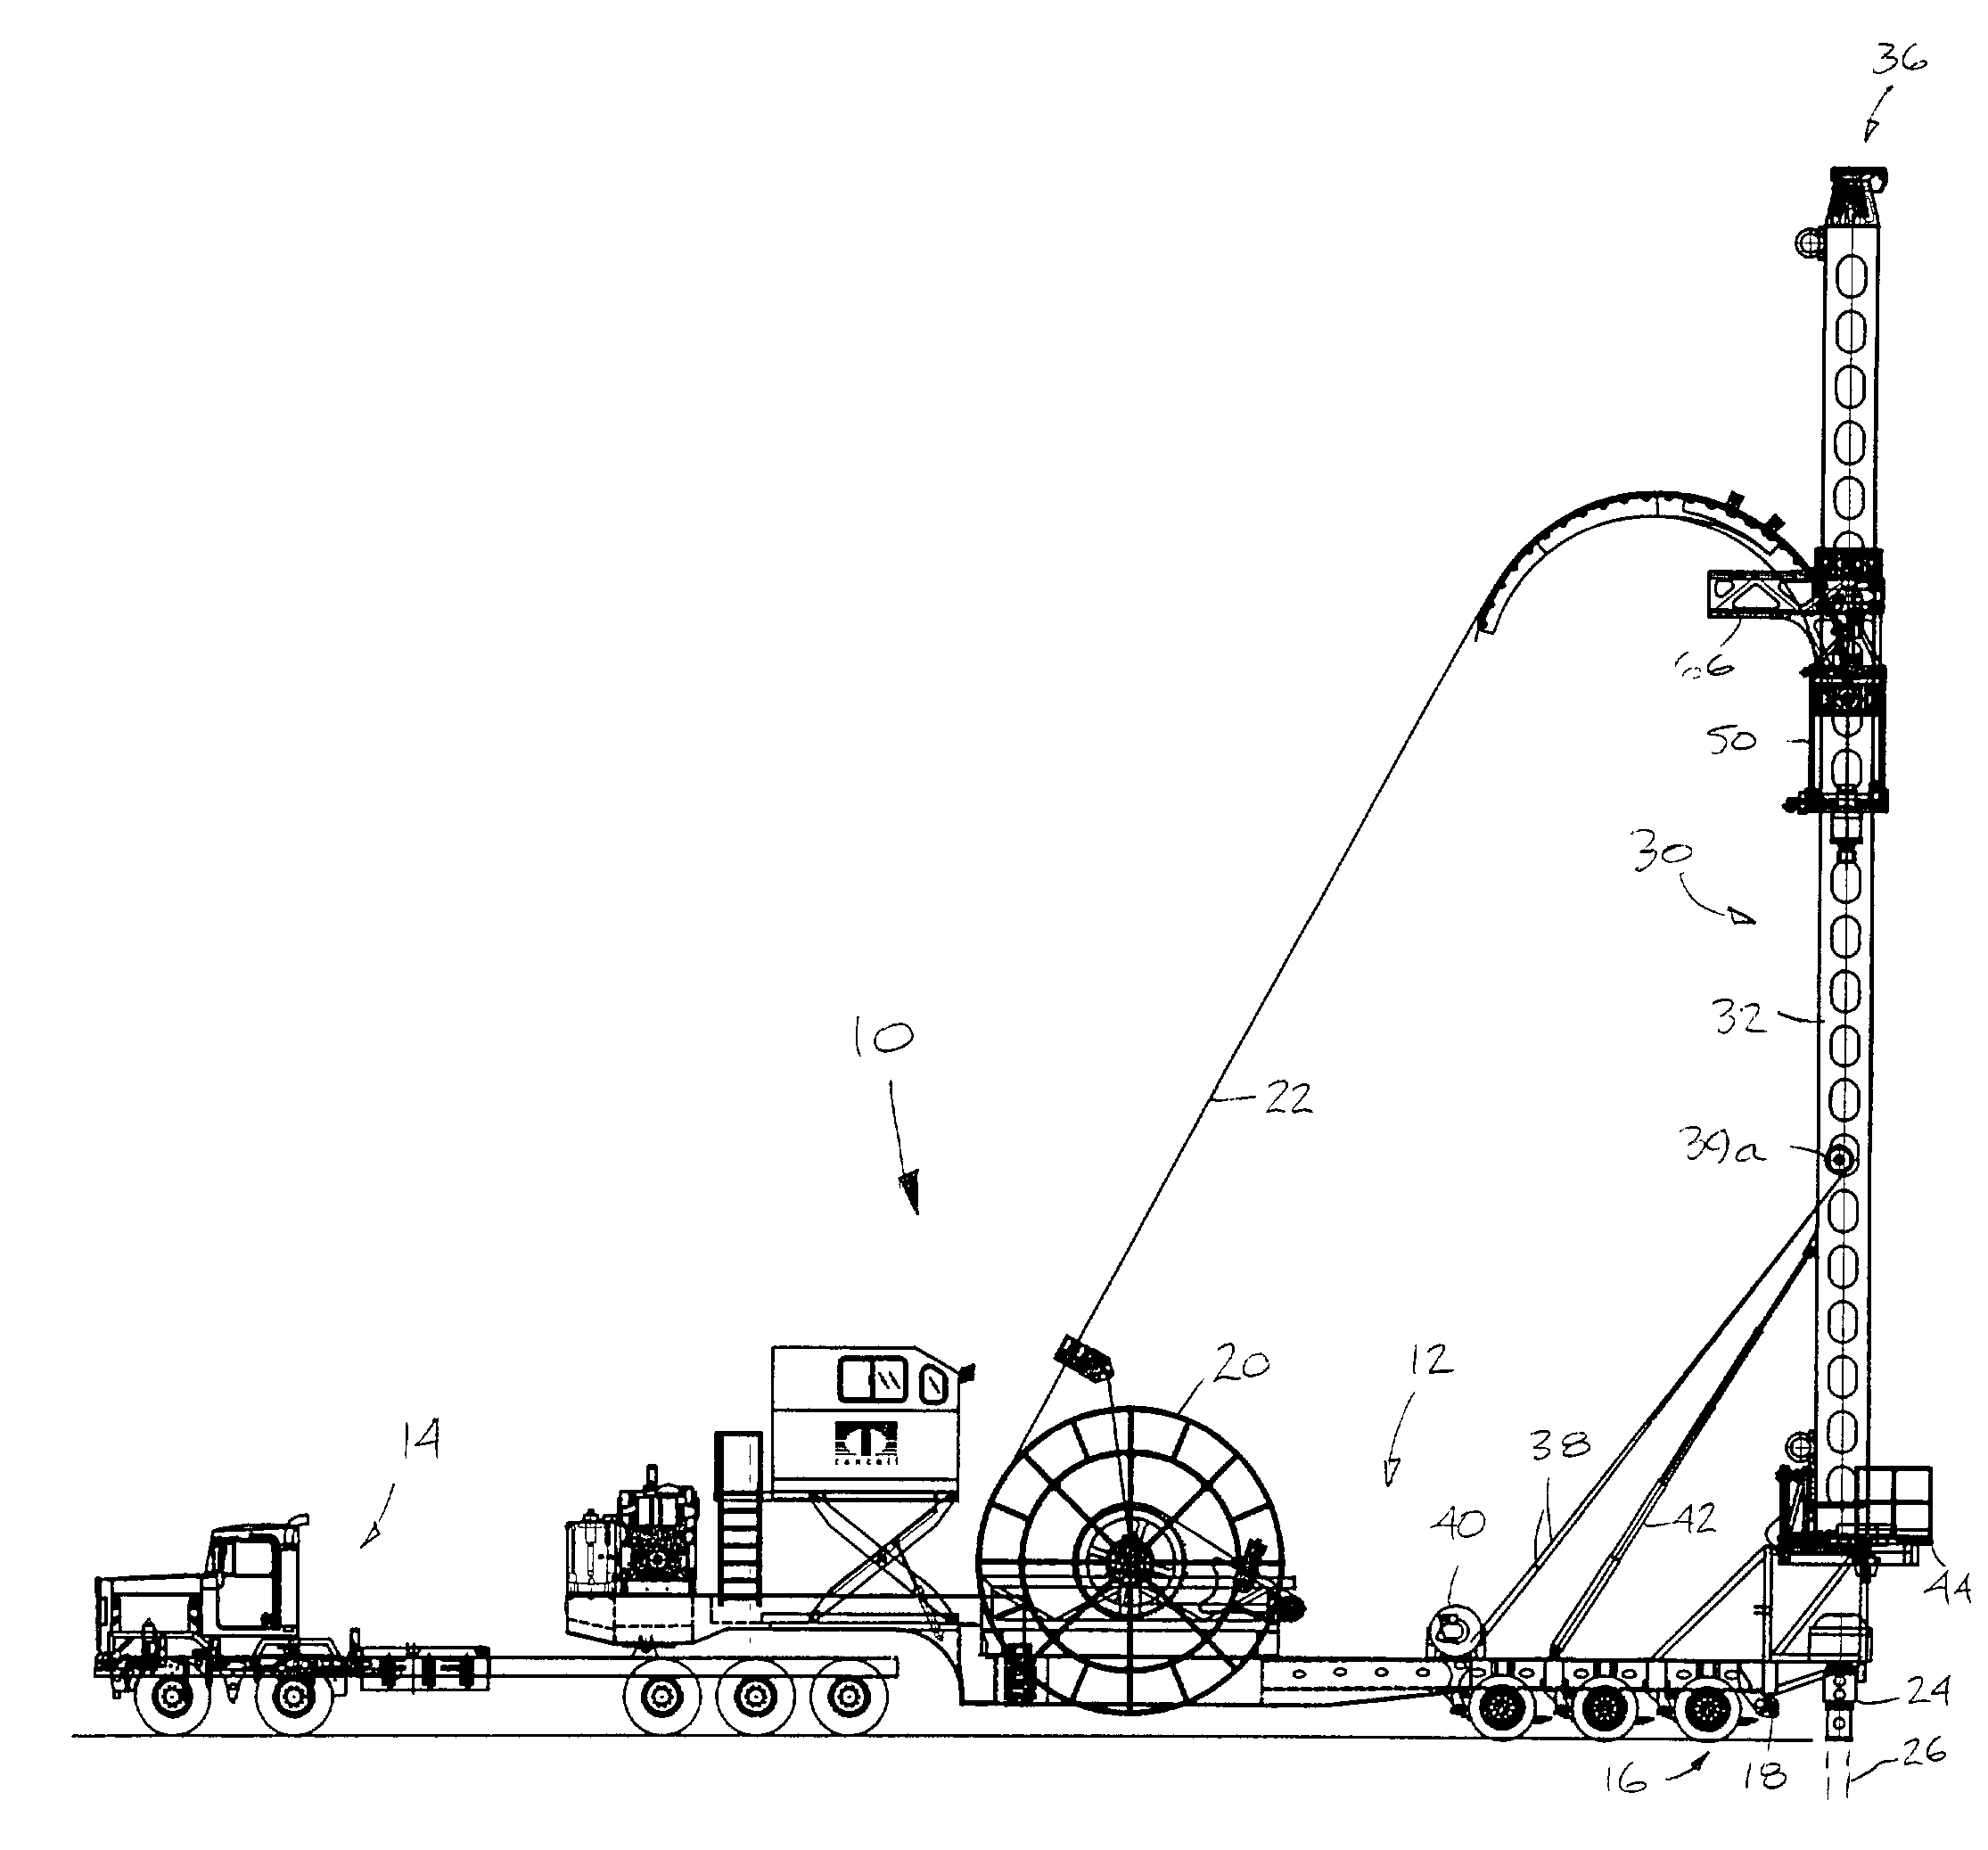 Mast and trolley arrangement for mobile multi-function rig